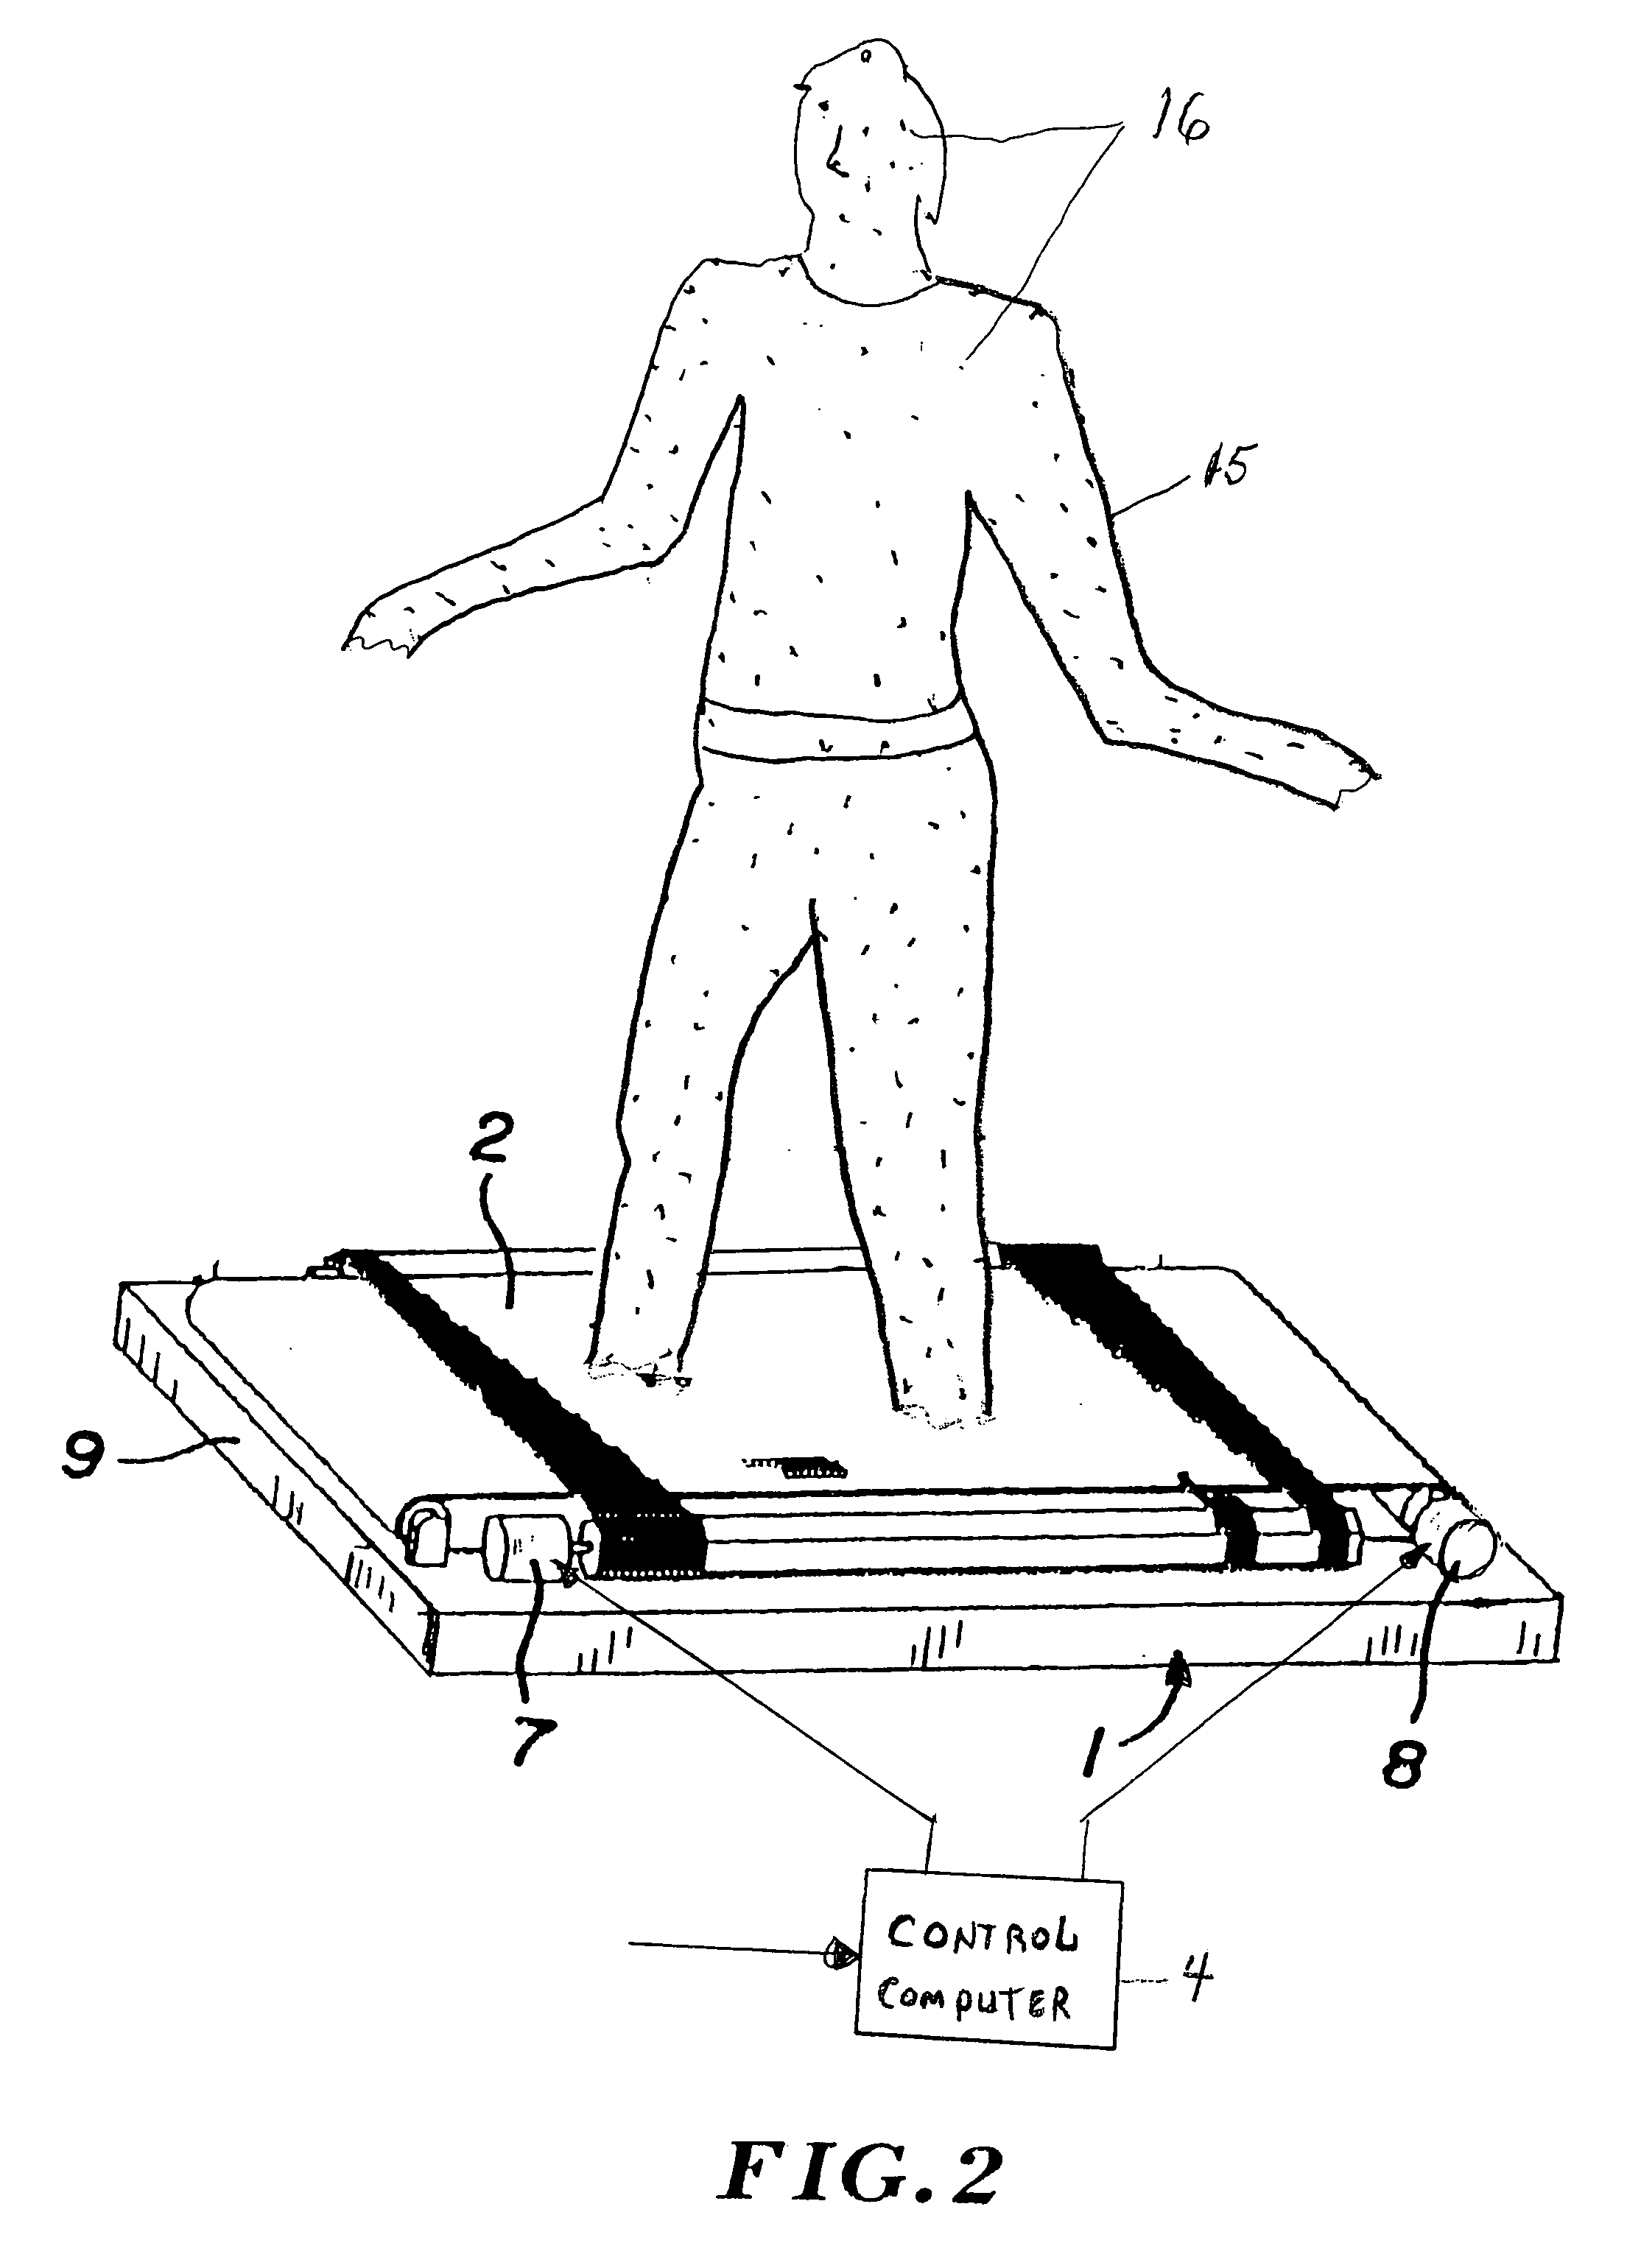 Combined omni-directional treadmill and electronic perception technology